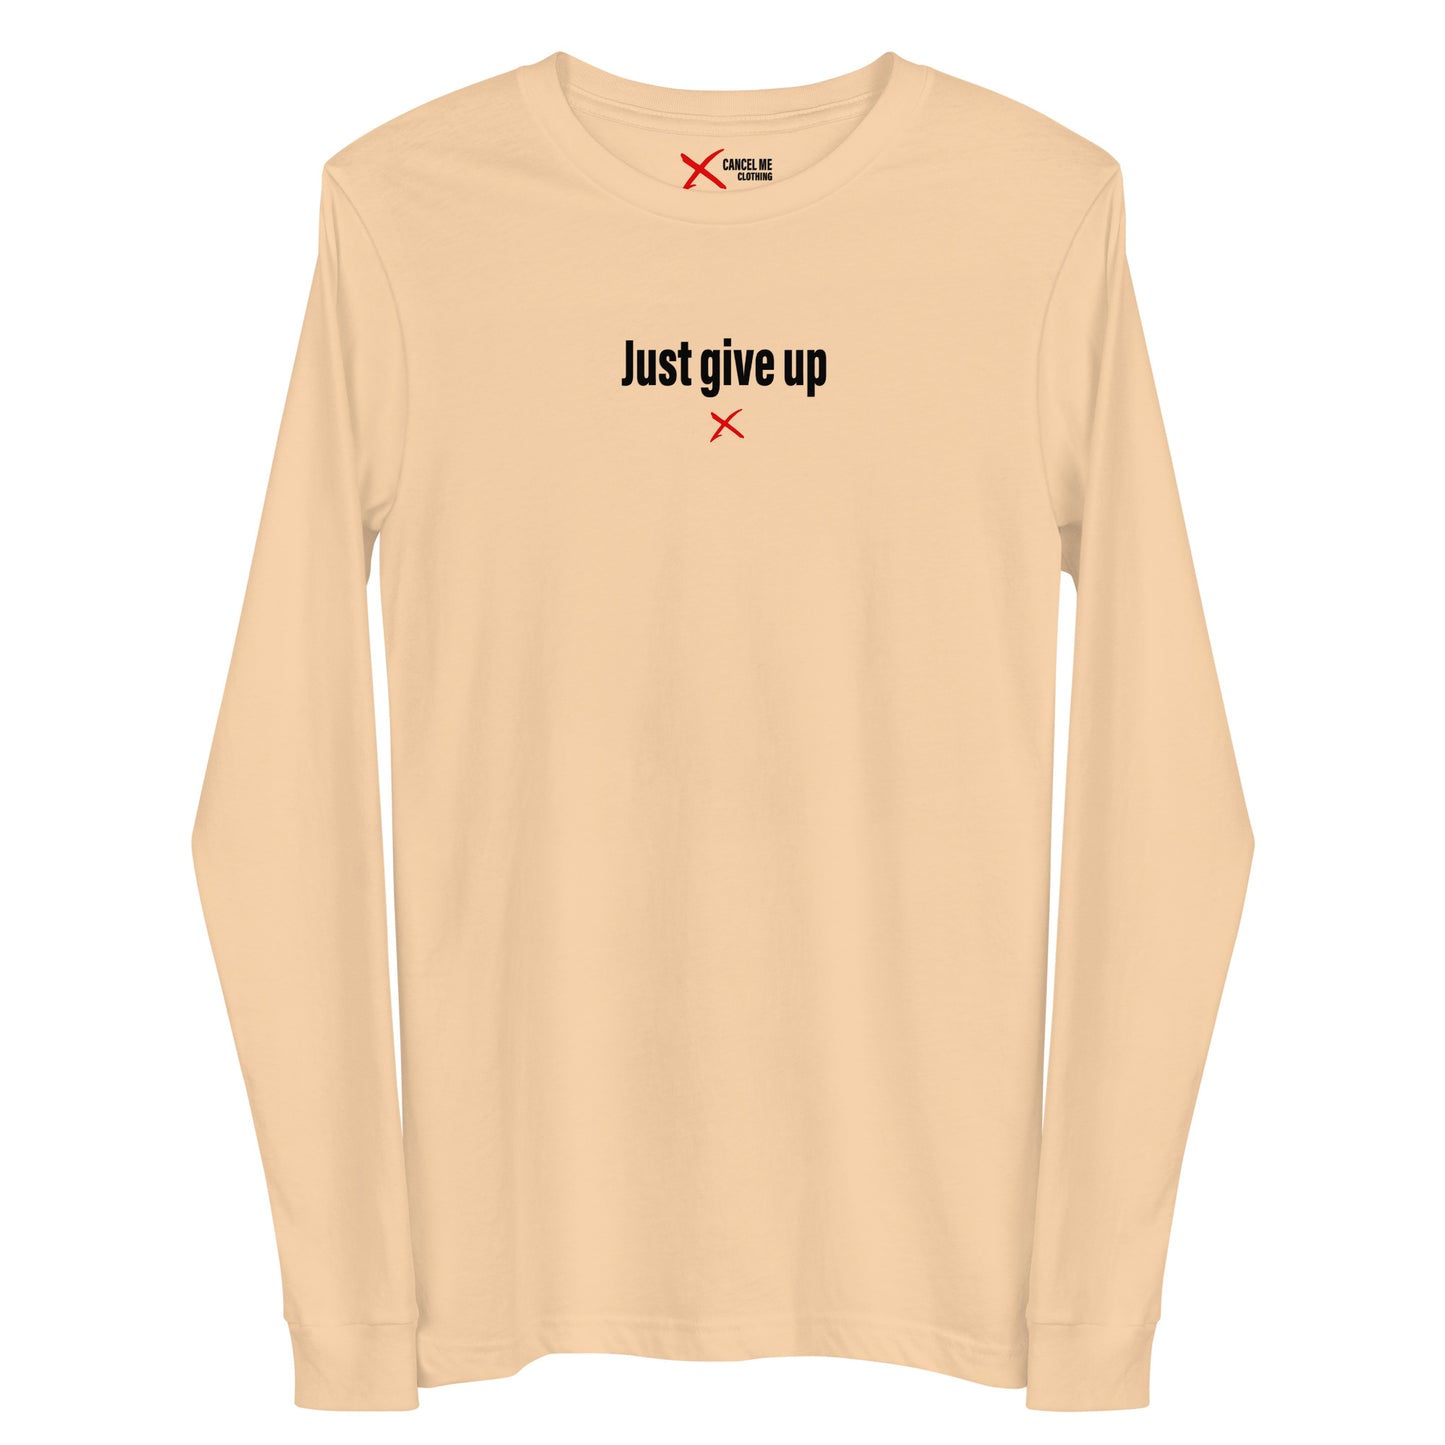 Just give up - Longsleeve